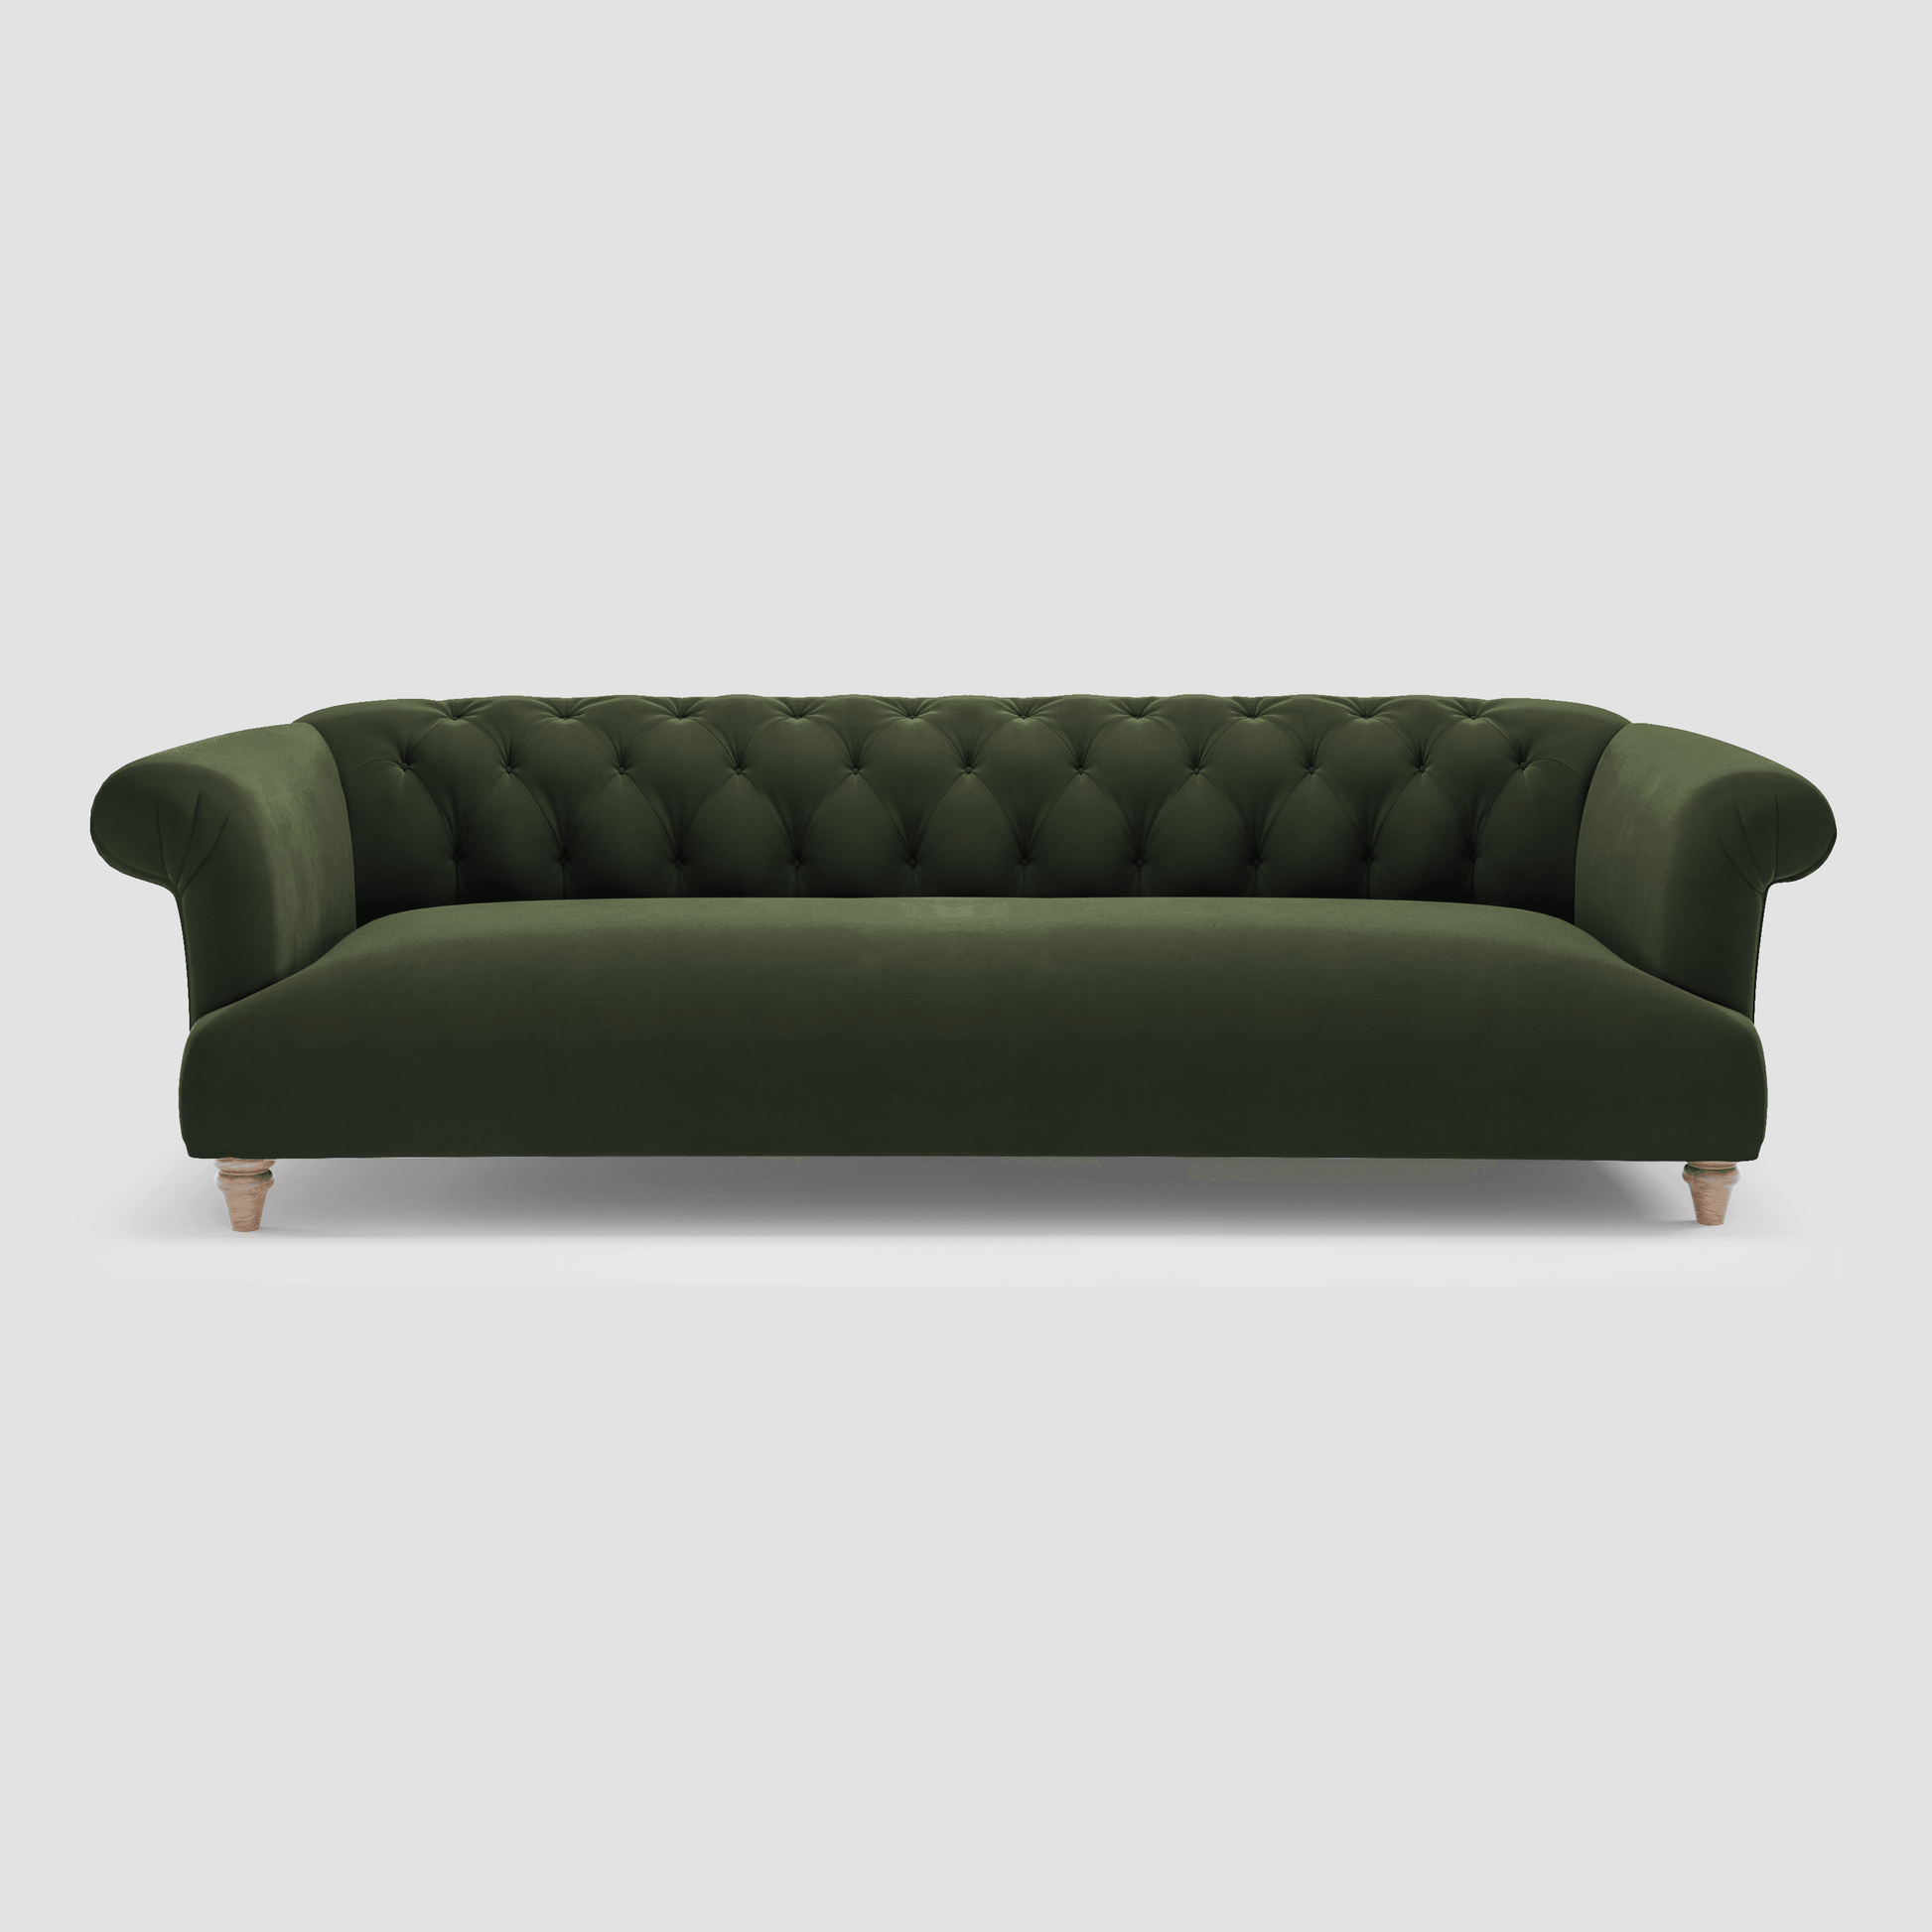 Aggy Four Seater Sofa - Flown the Coop